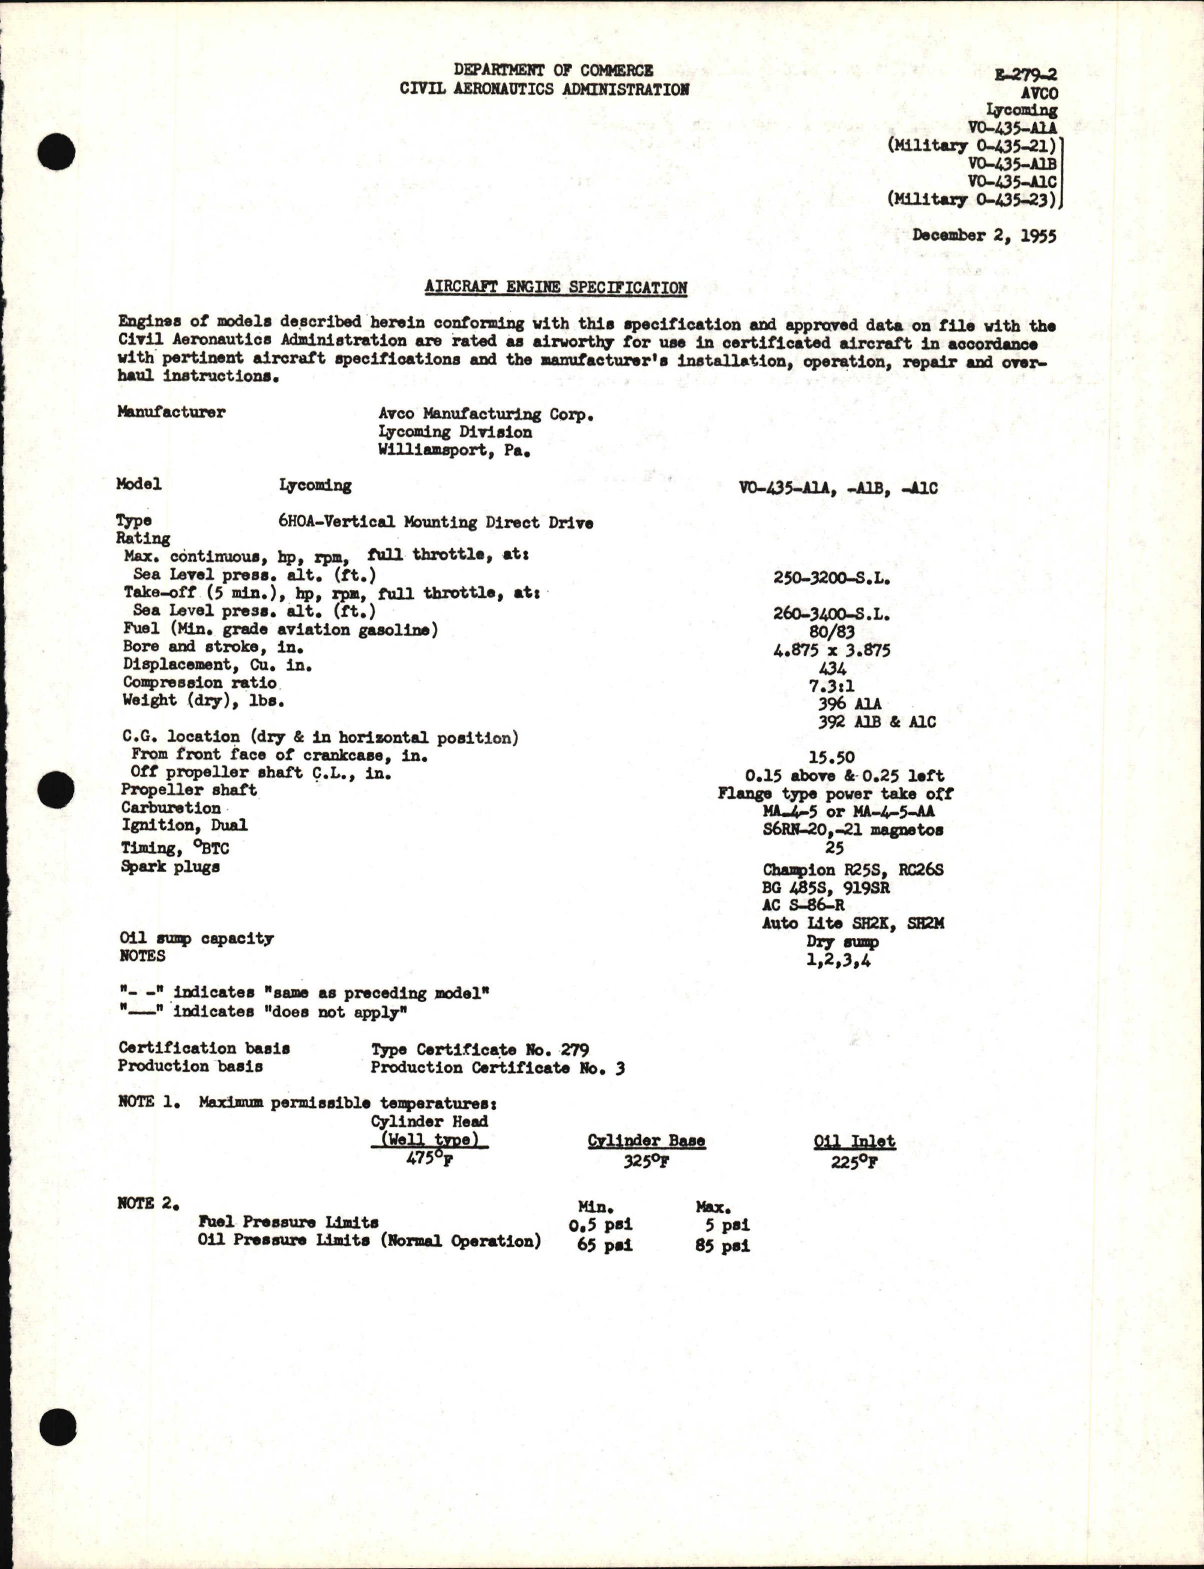 Sample page 1 from AirCorps Library document: O-435 and VO-435